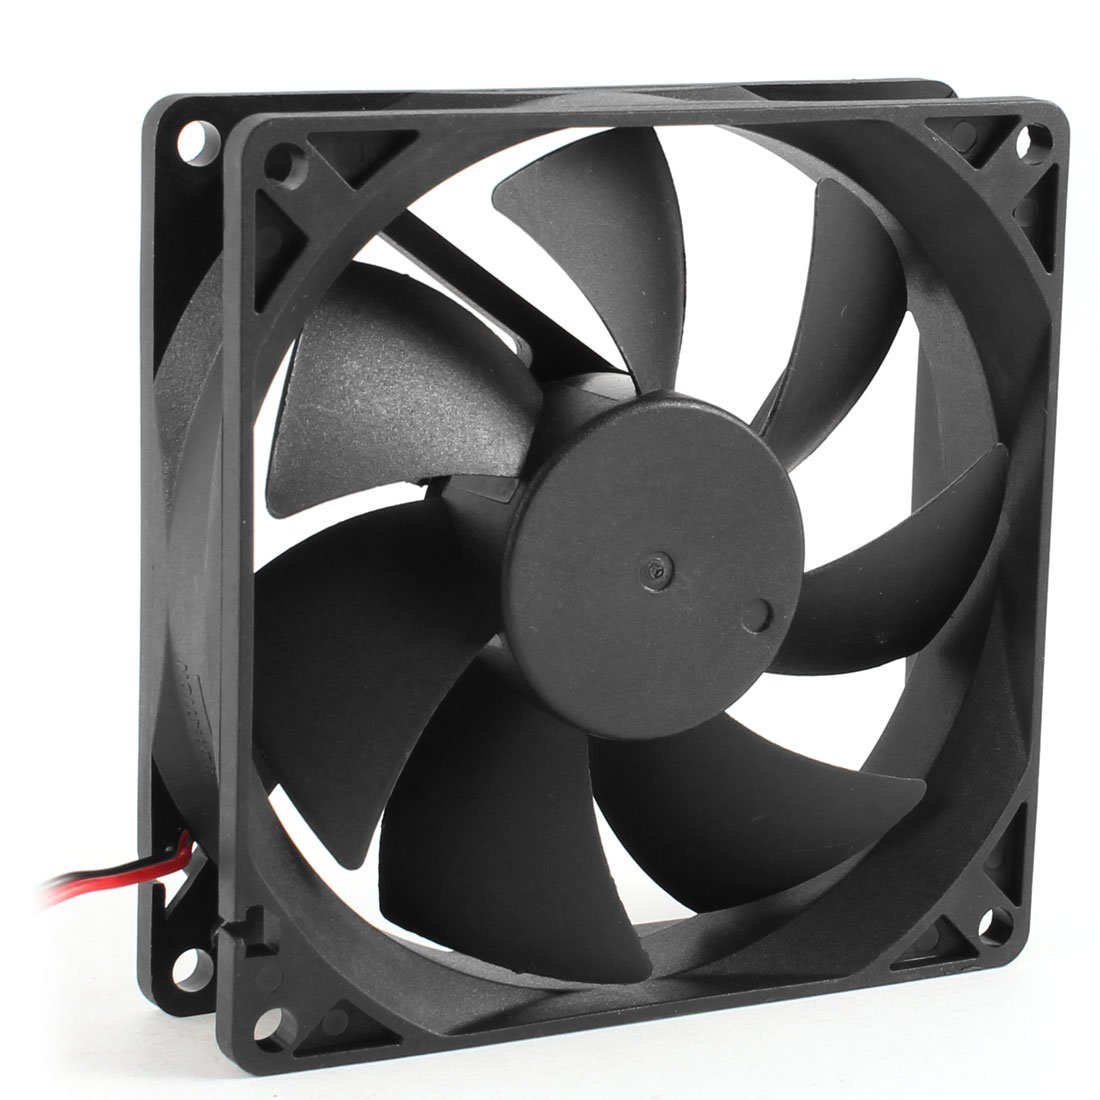 New Laptop Cooling Fan for Sony vaio VPC EA EB series 3 Pins PN: UDQFRZH14CF0 CPU Cooler/Radiator